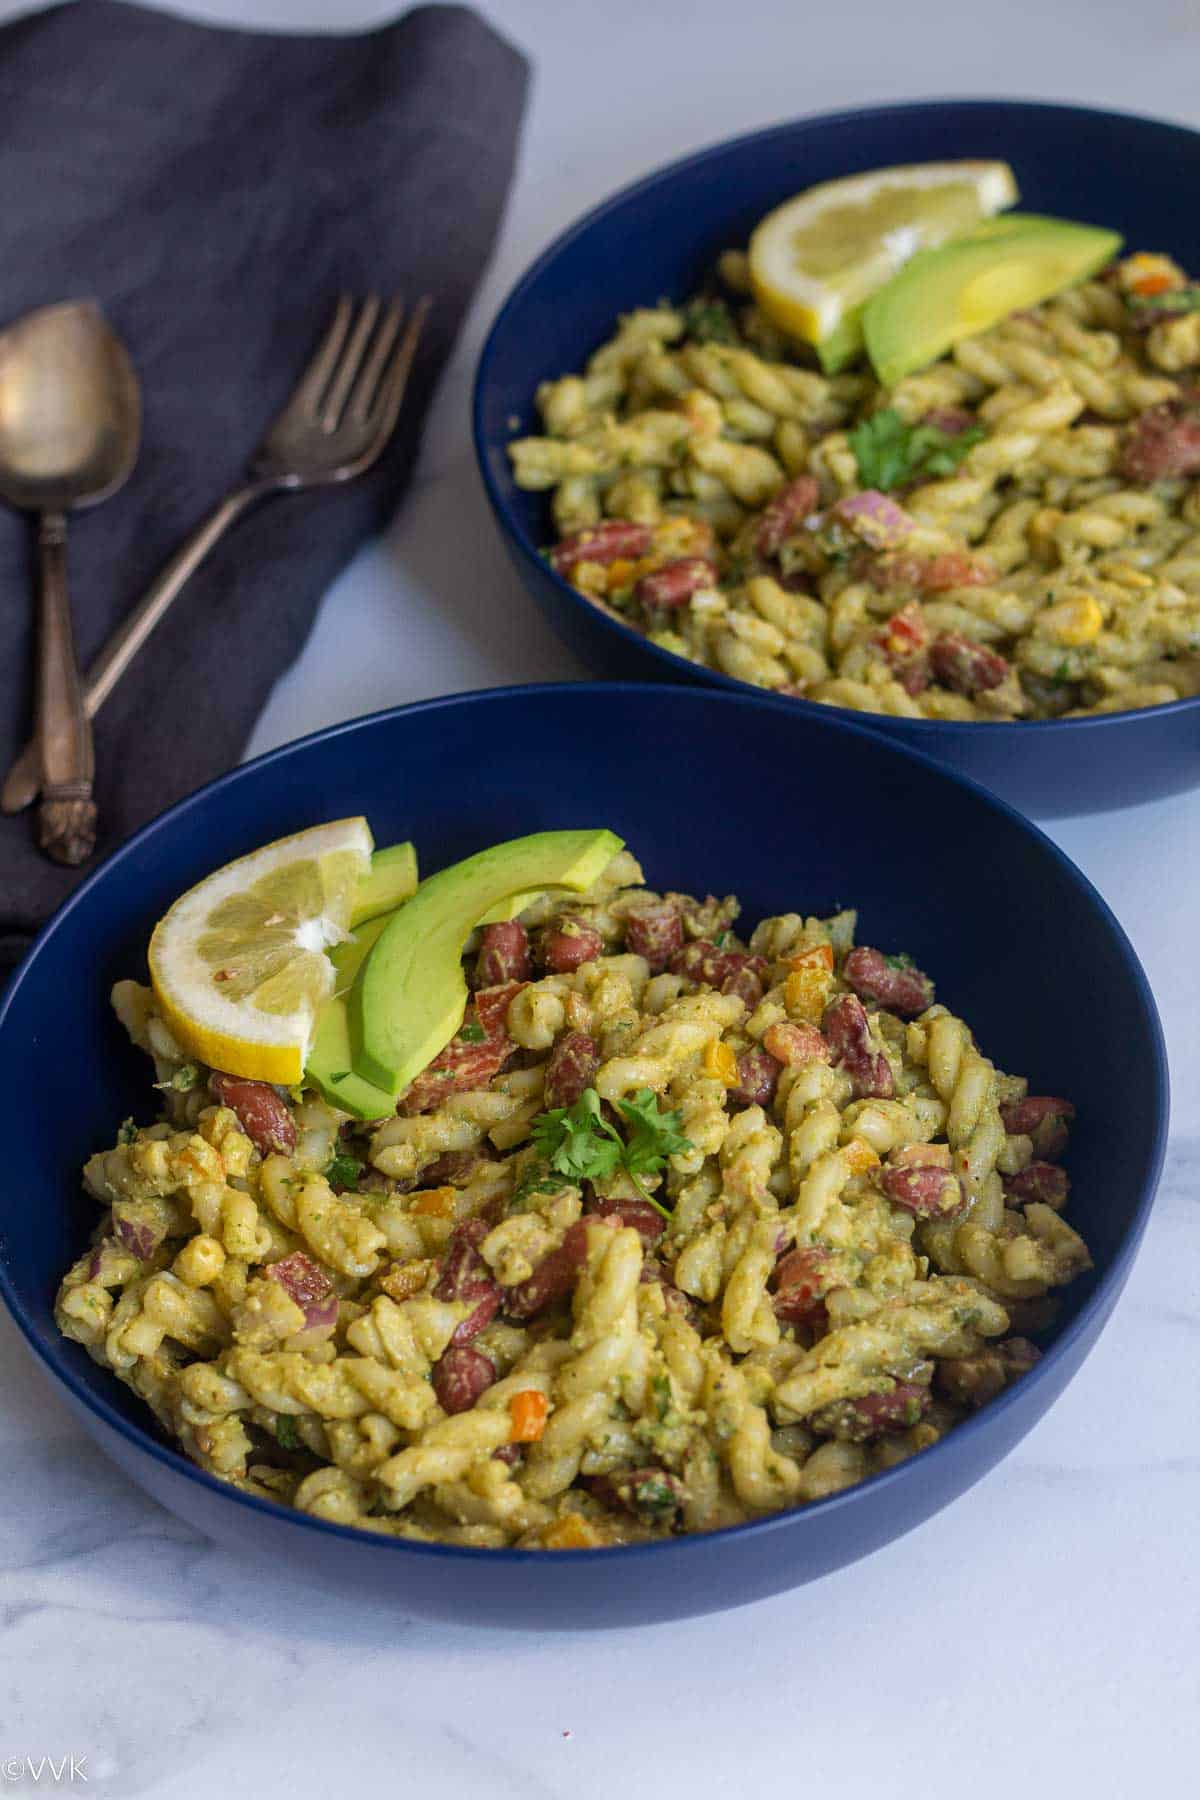 taco pasta salad topped with lemon wedge and avocado slice served in a blue bowl